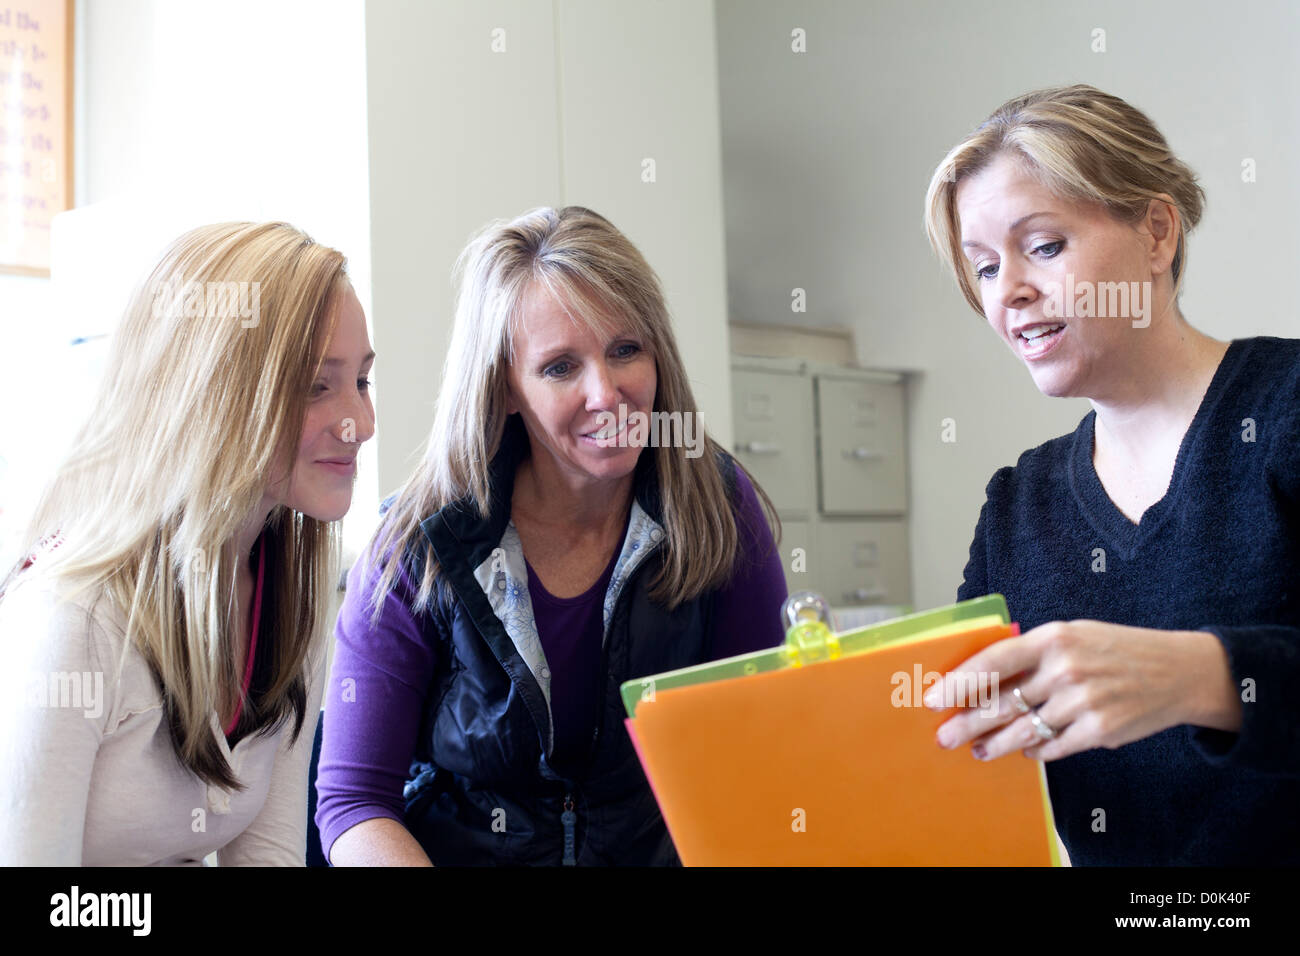 Teacher discussing school work with parent and student in classroom. Stock Photo